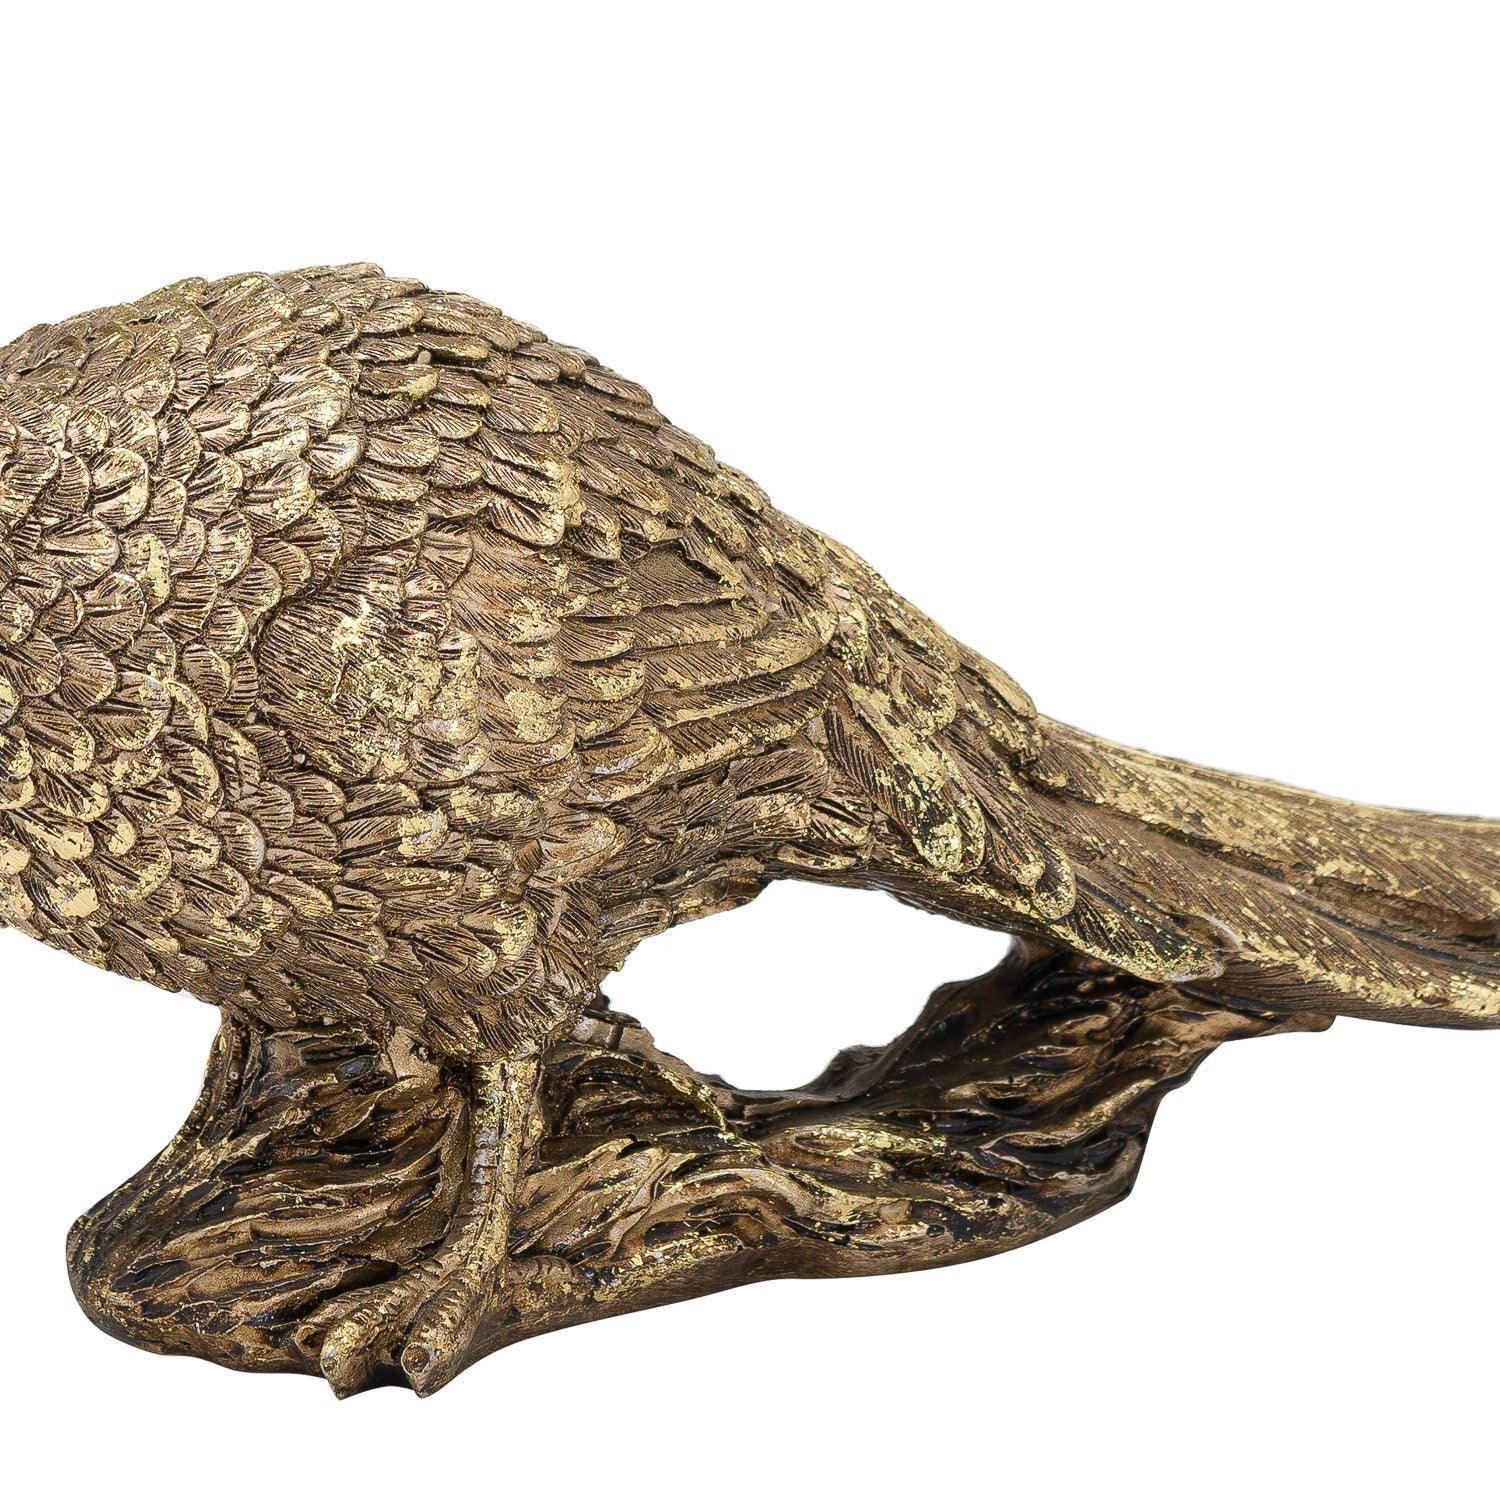 Antique Gold Pheasant Ornament - Vookoo Lifestyle